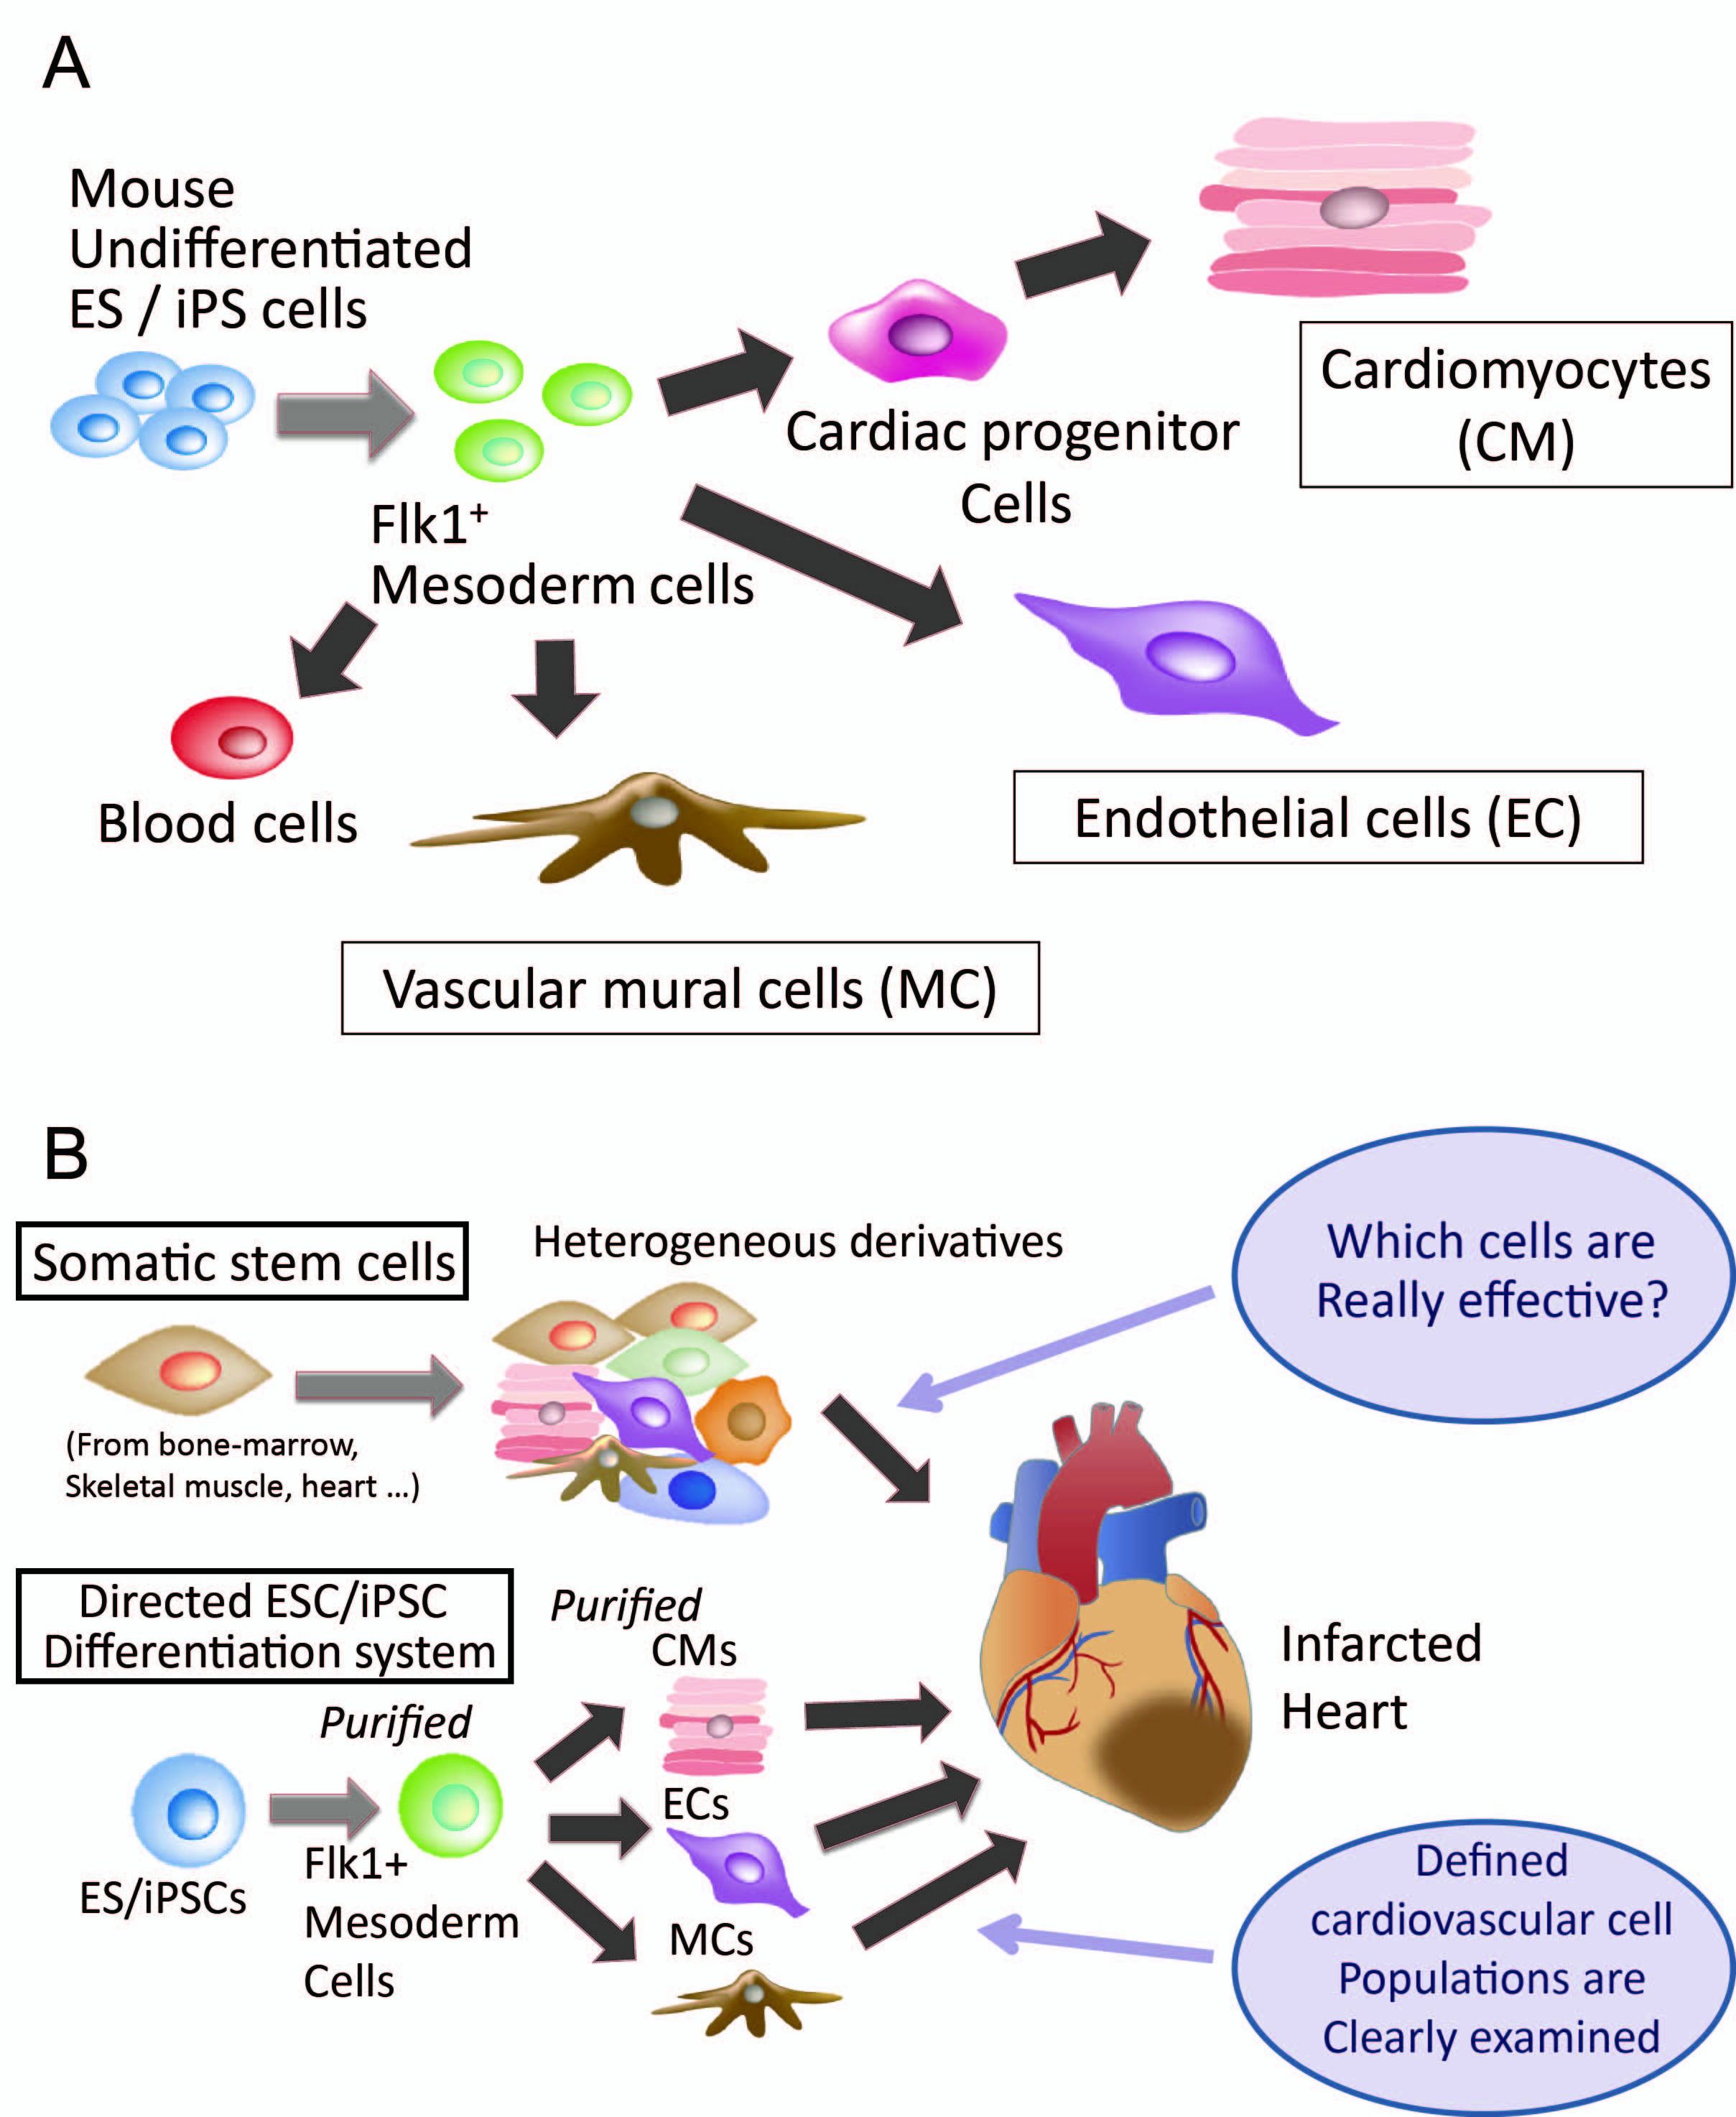 pluripotent stem cells for cardiac cell therapy: the application of